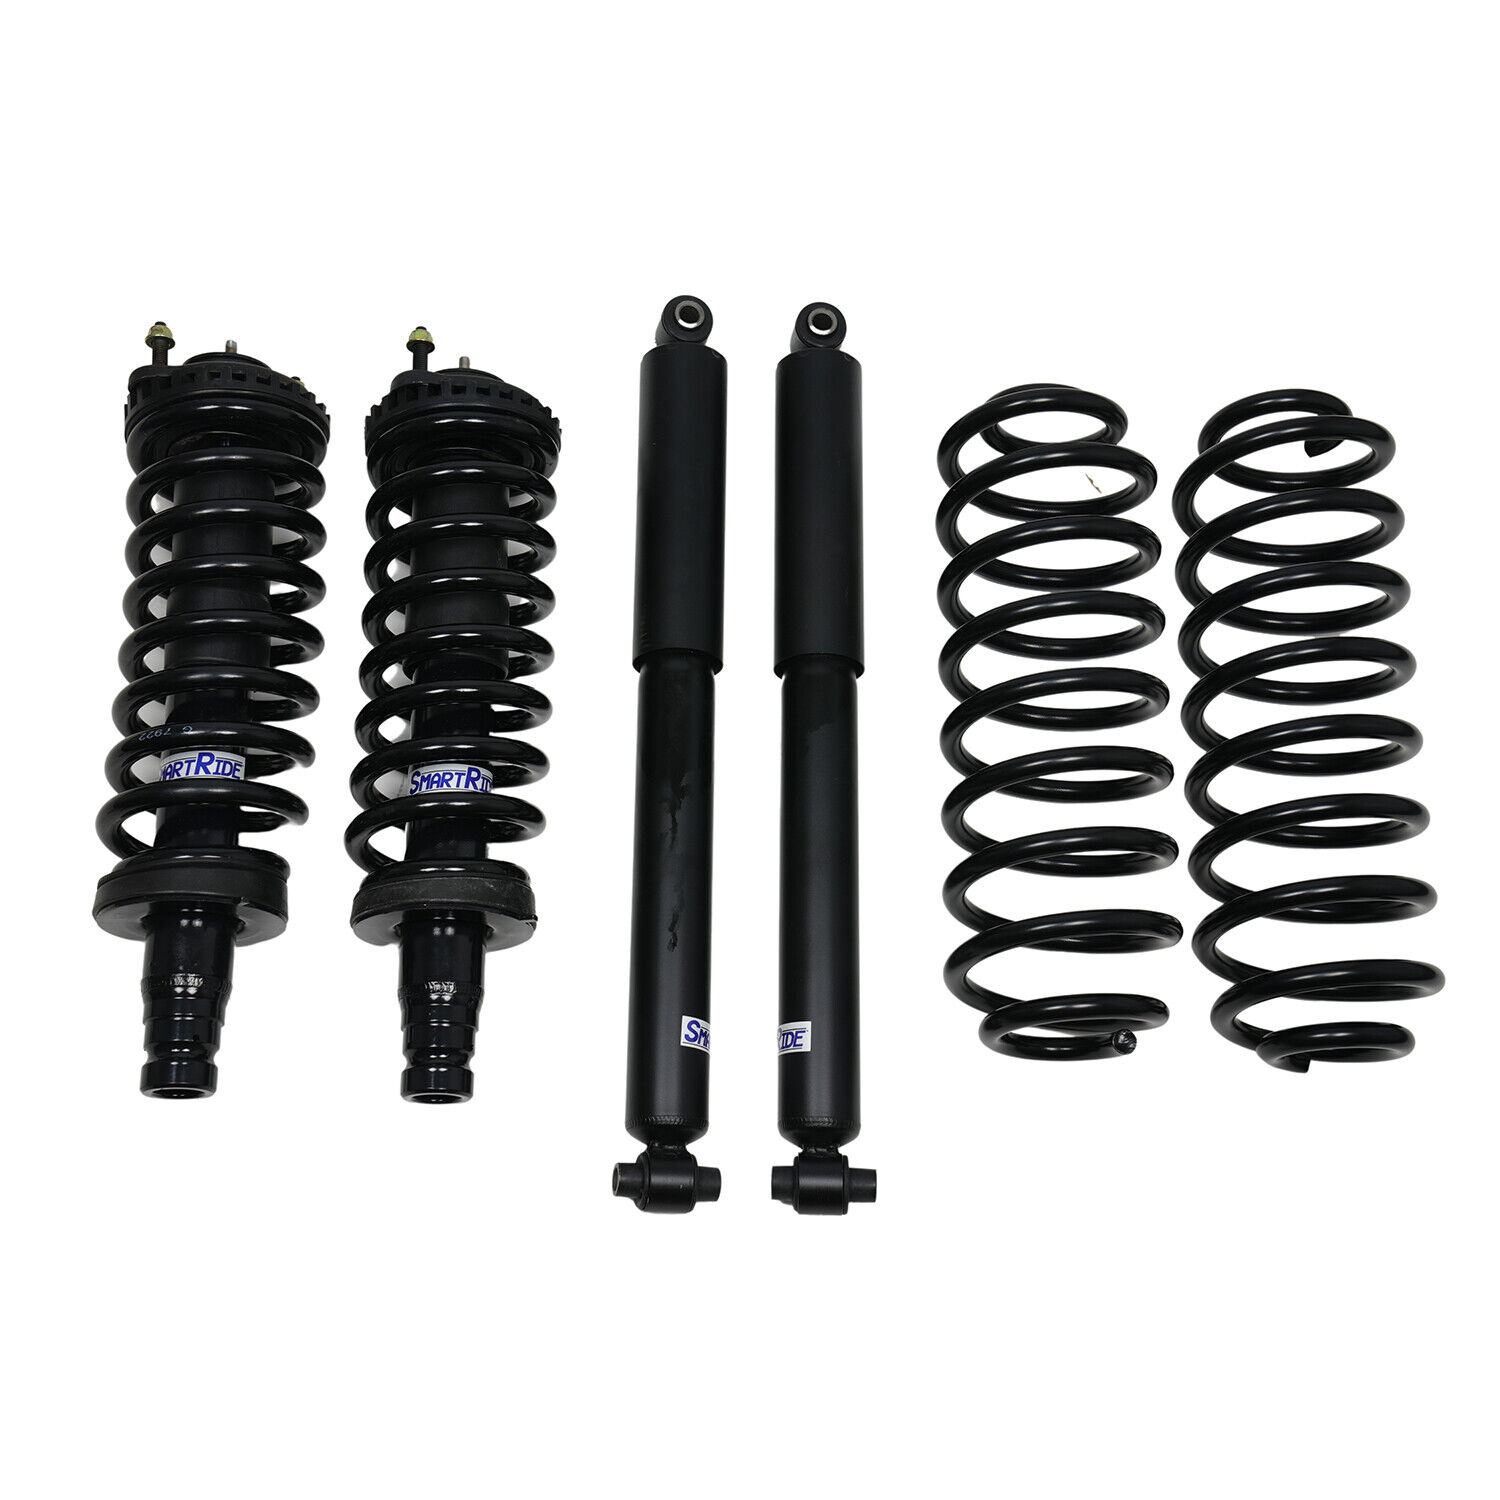 SmartRide 4-Wheel Air Suspension Conversion Kit for 2005-2009 Saab 9-7x